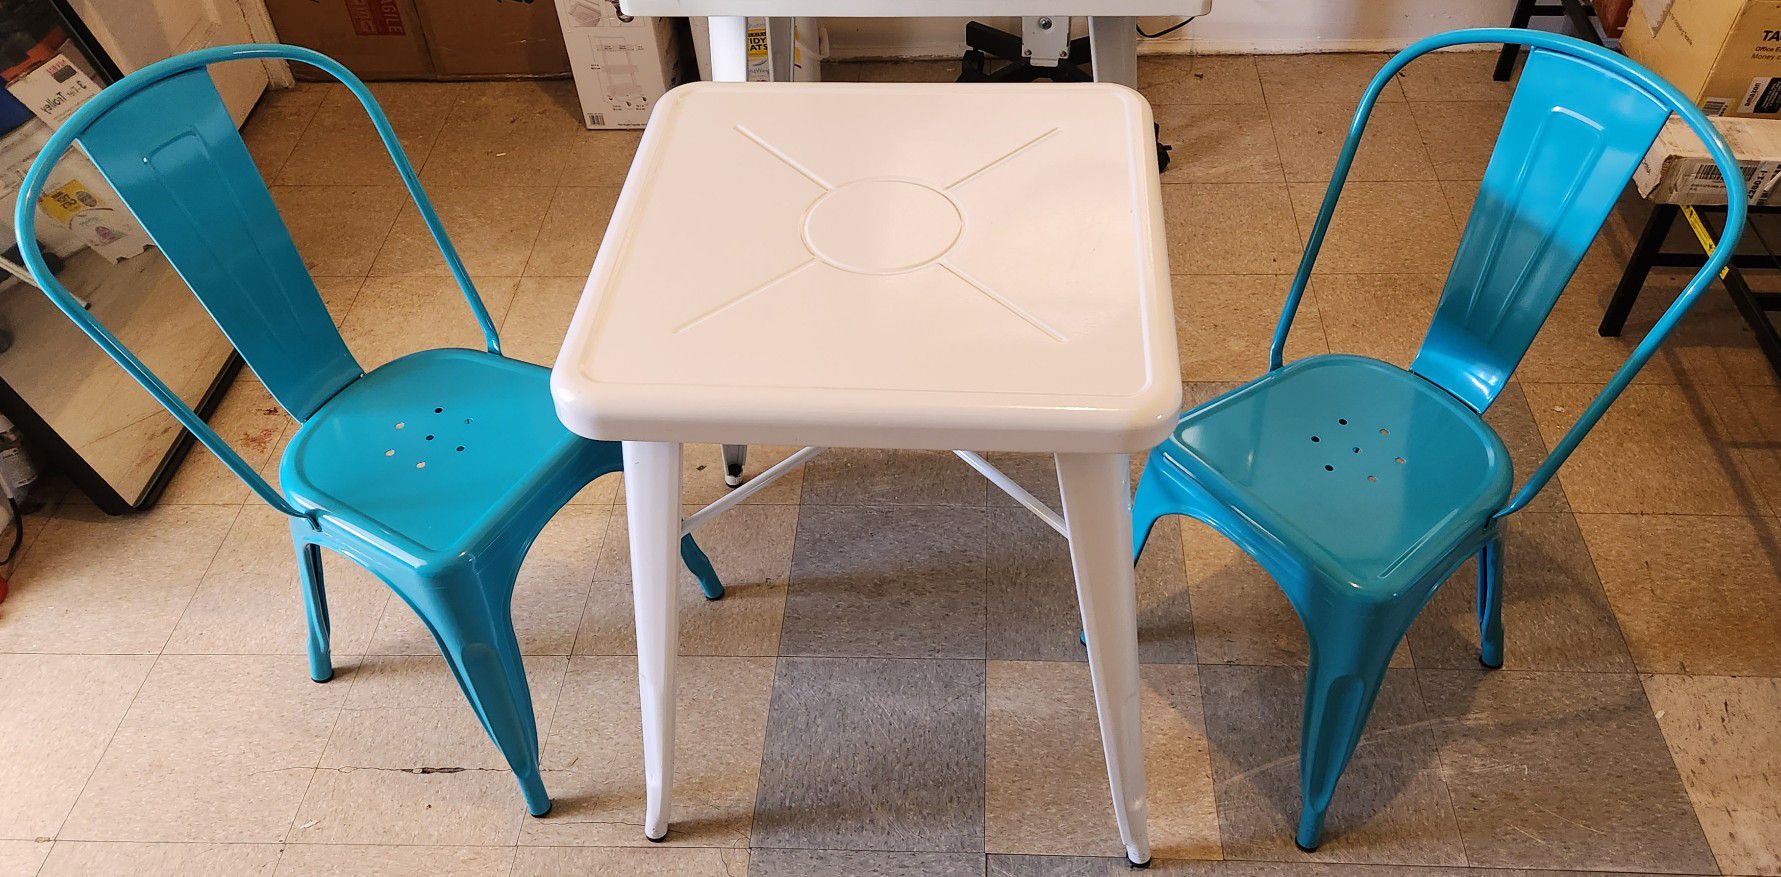 Small Table 2 Chairs $125 obo